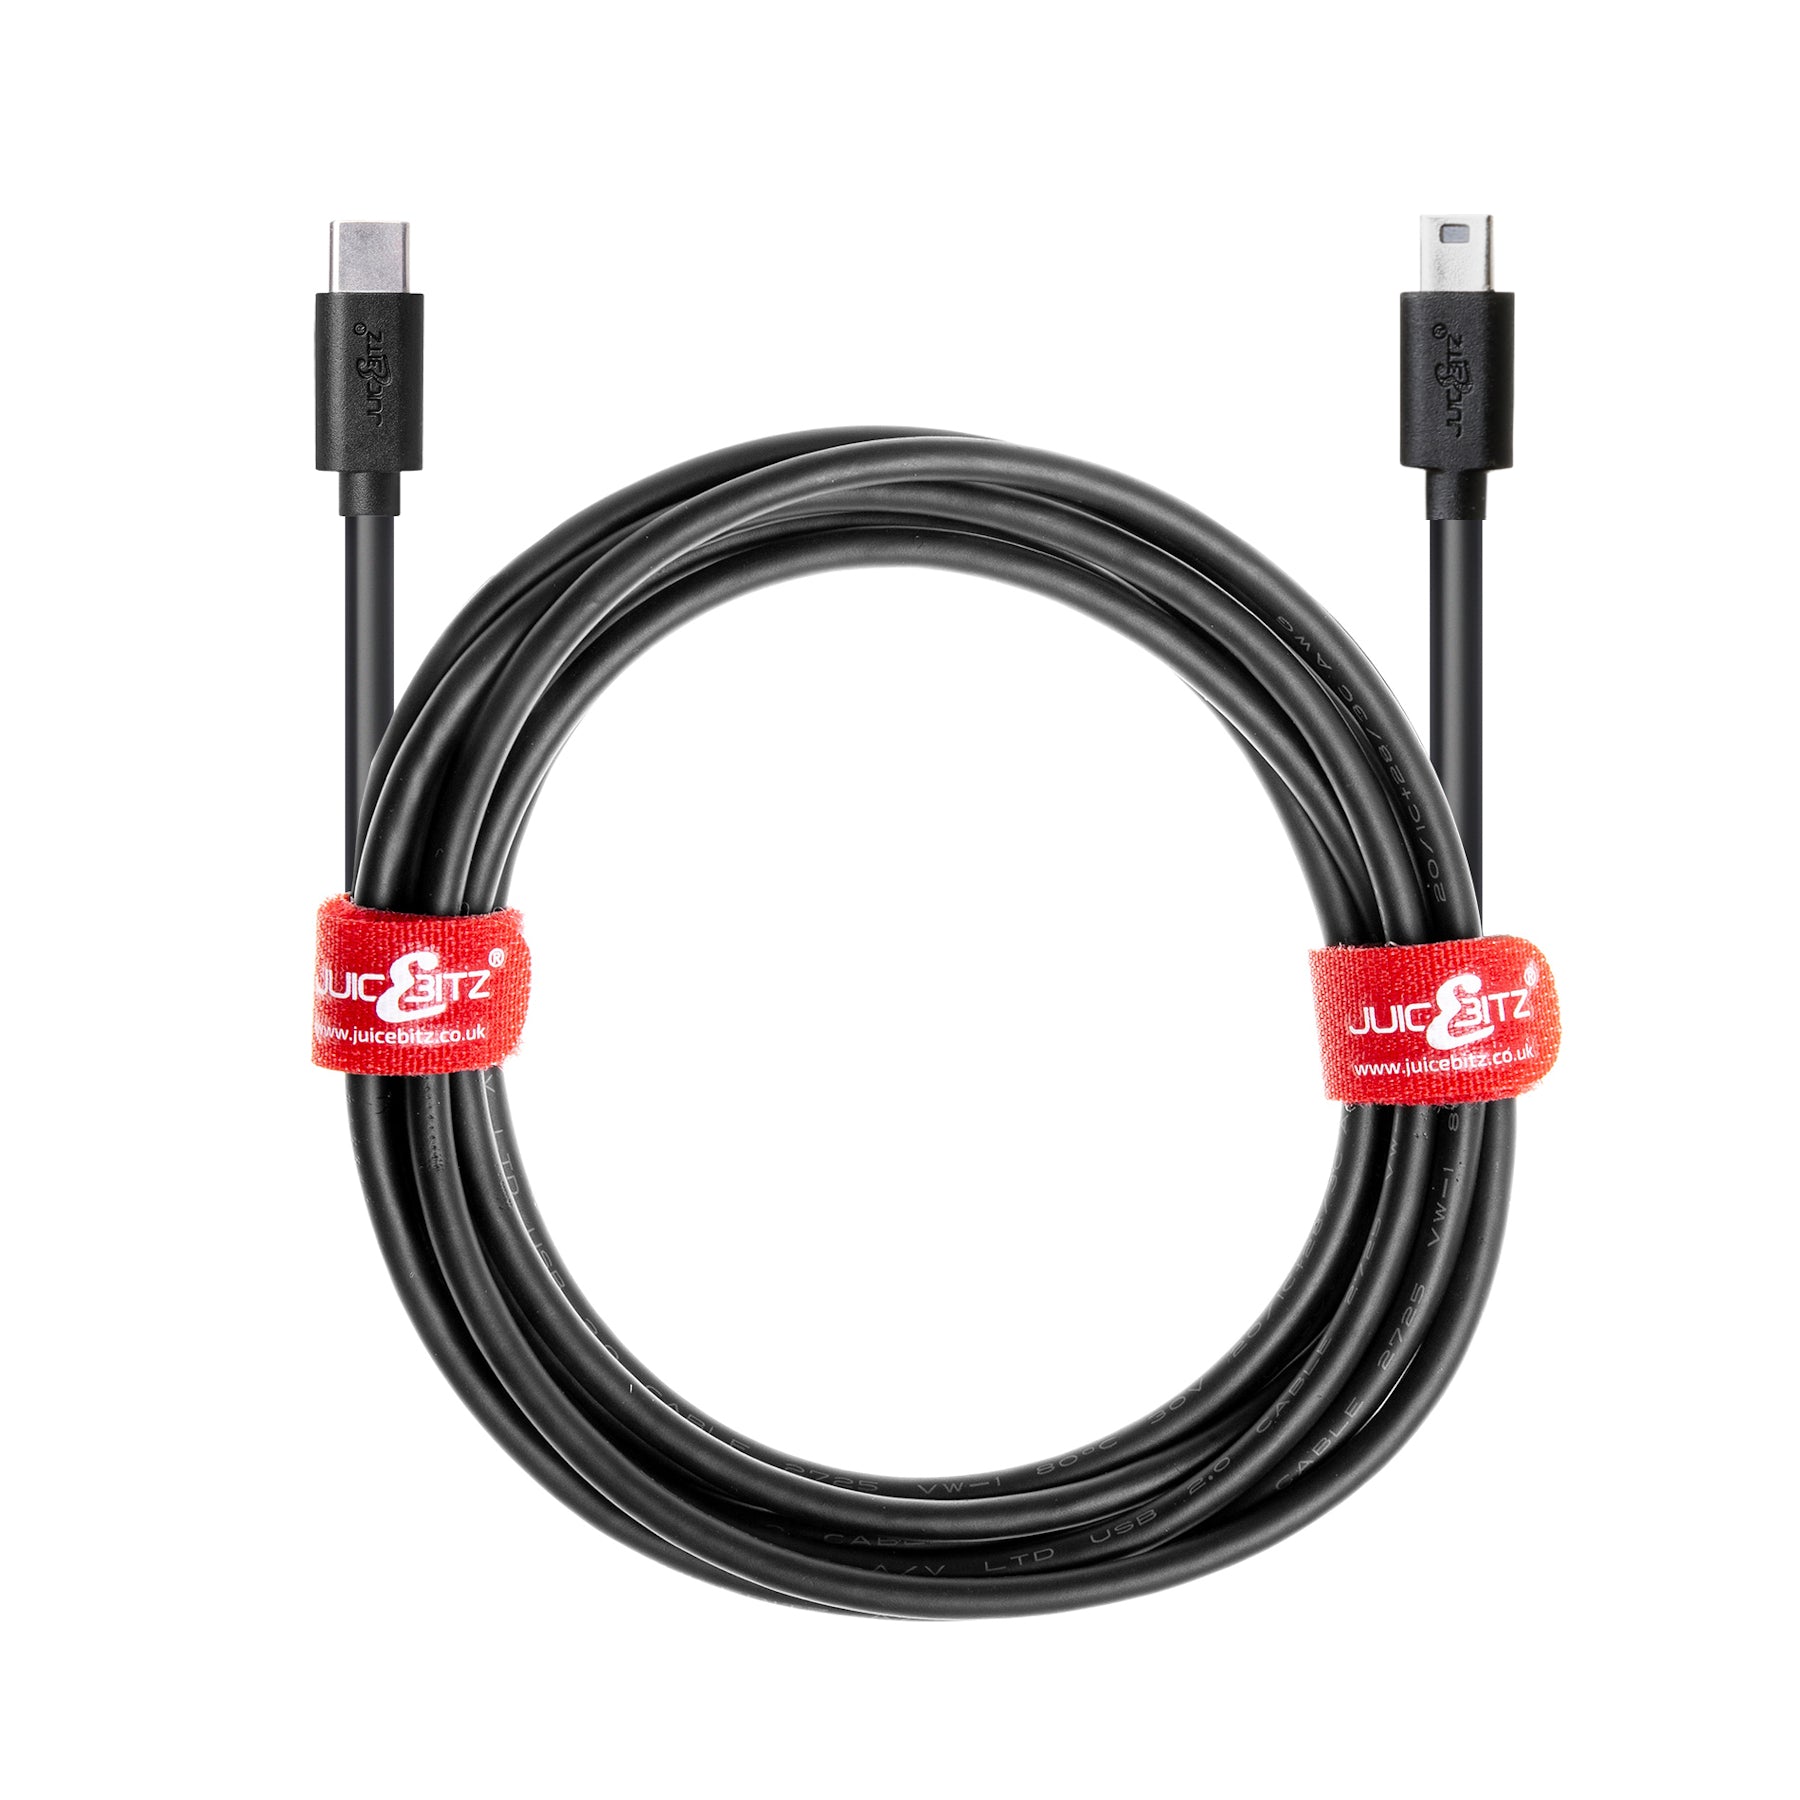 USB-C to Mini-USB 2.0 Charger Data Sync Cable - Black